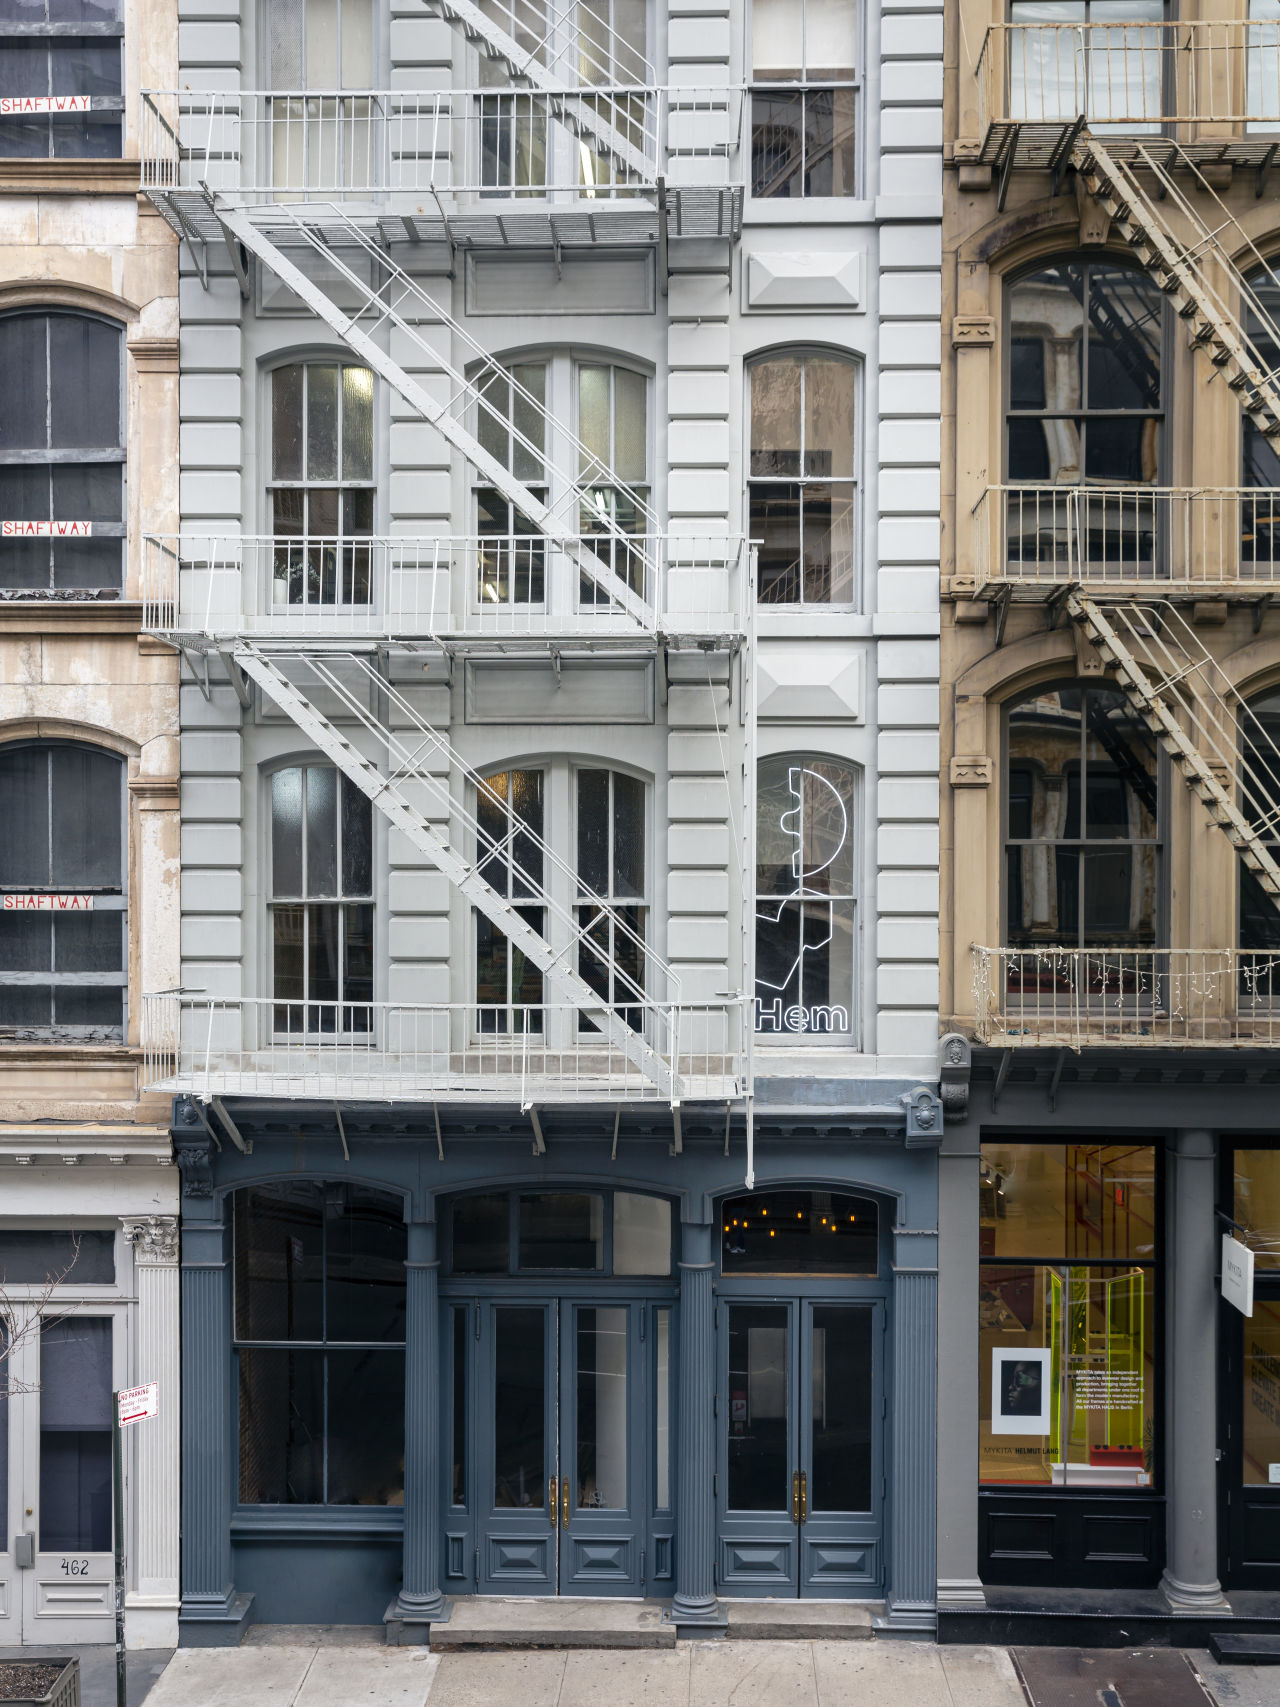 An image of the outside of Hem's NY studio / showroom.